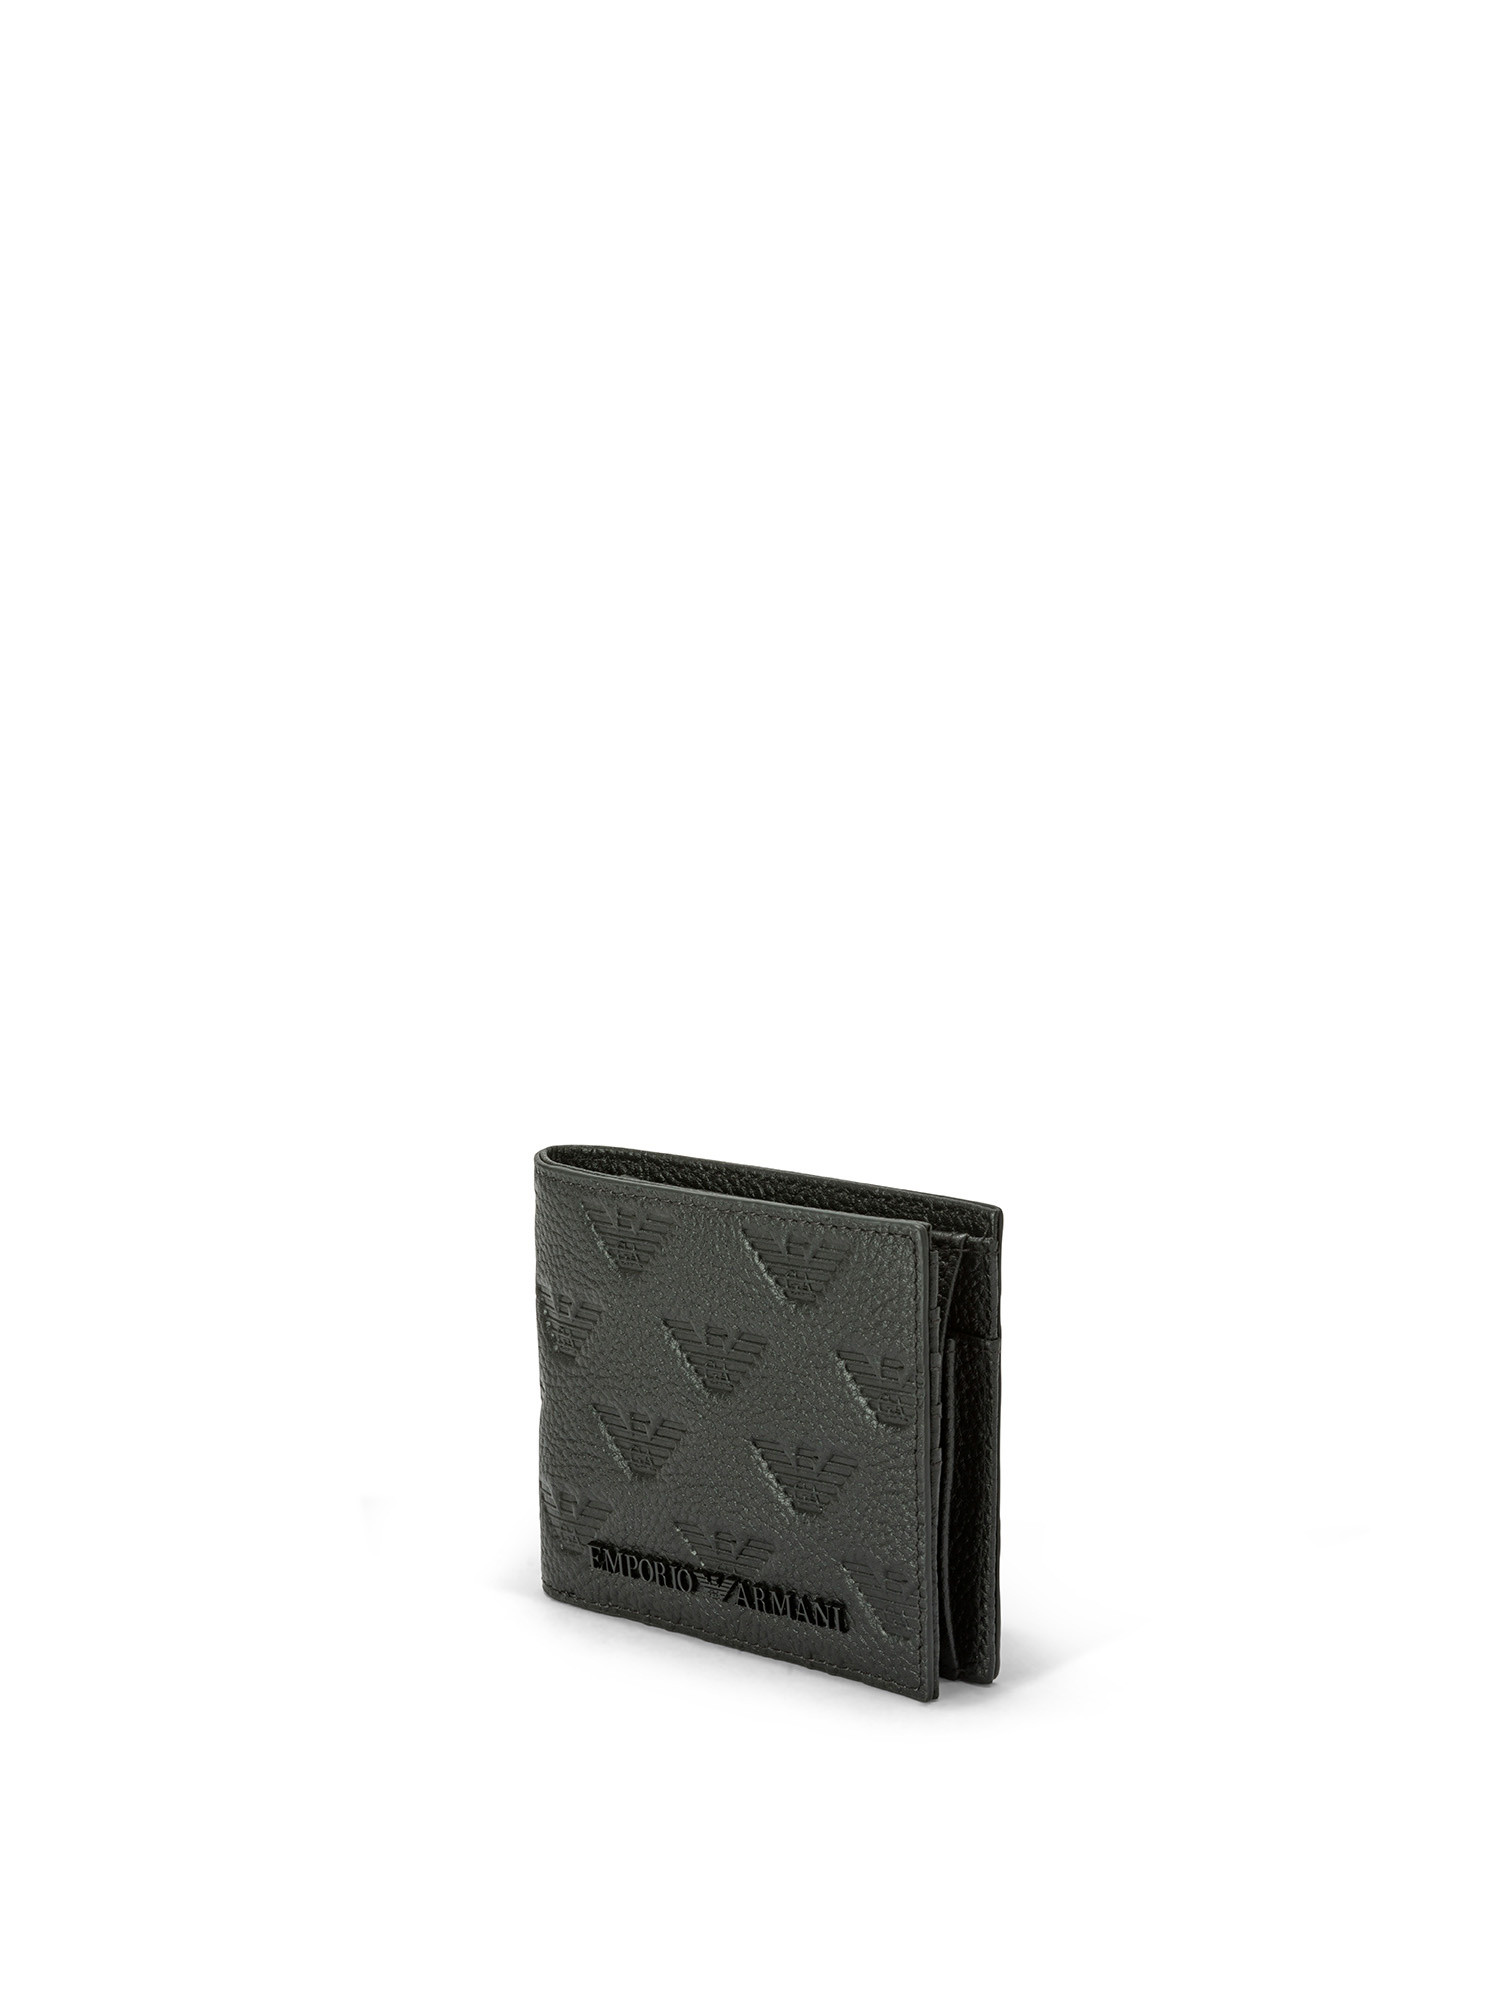 Emporio Armani - Leather wallet with all over eagle logo and coin purse, Black, large image number 1